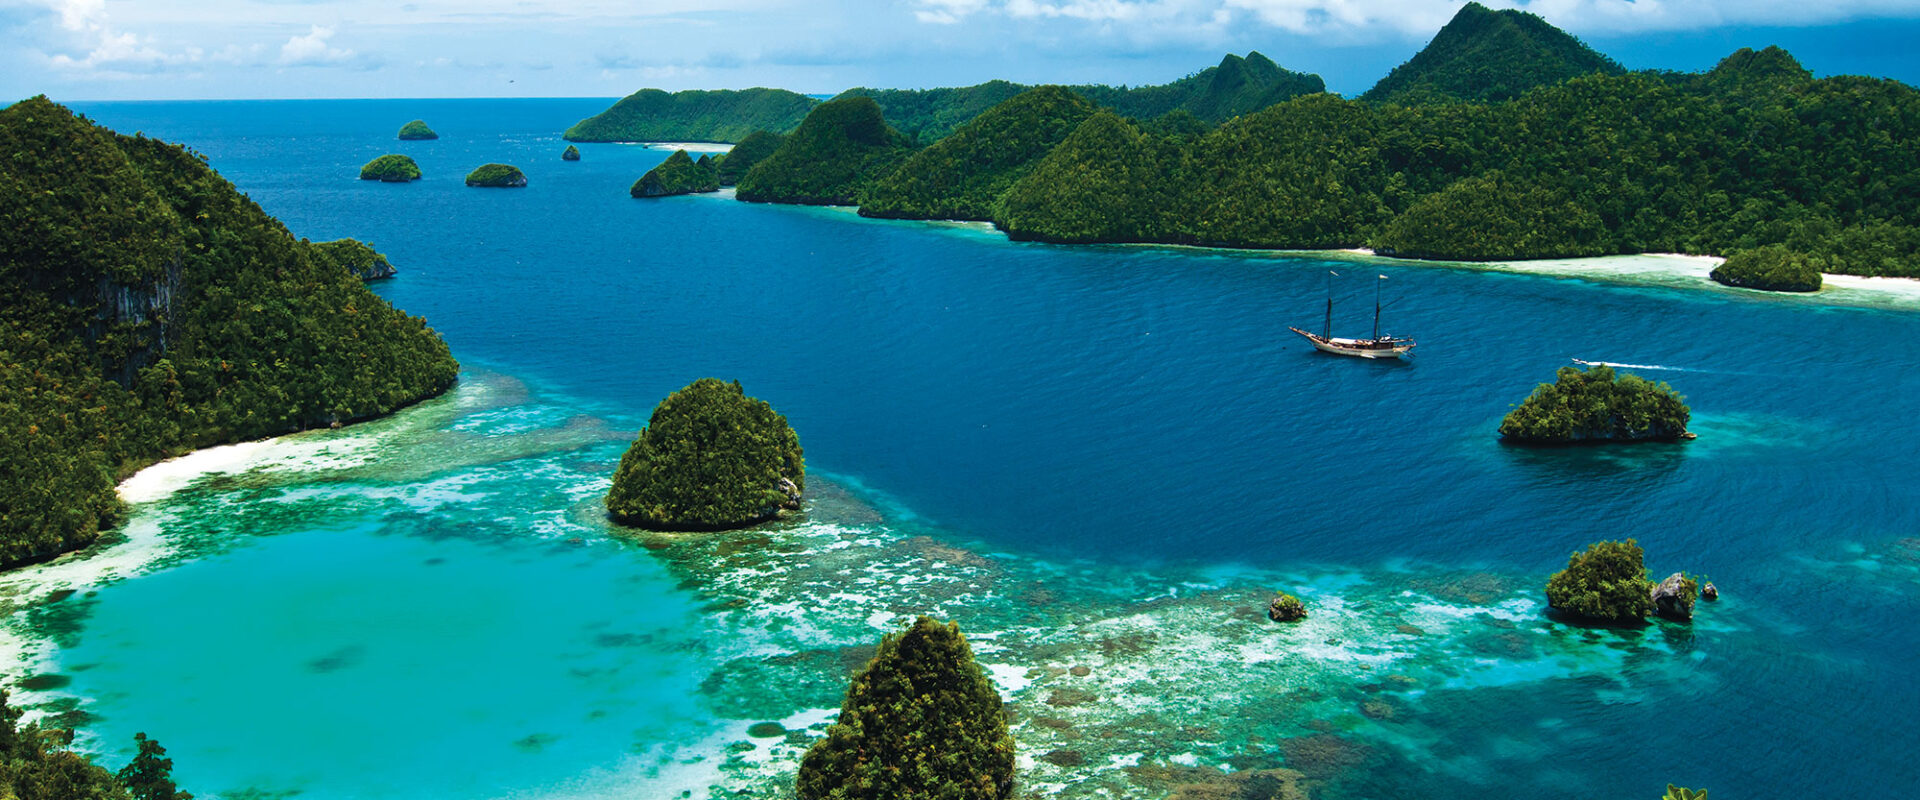 Raja Ampat, The Cure For My Grieving Heart